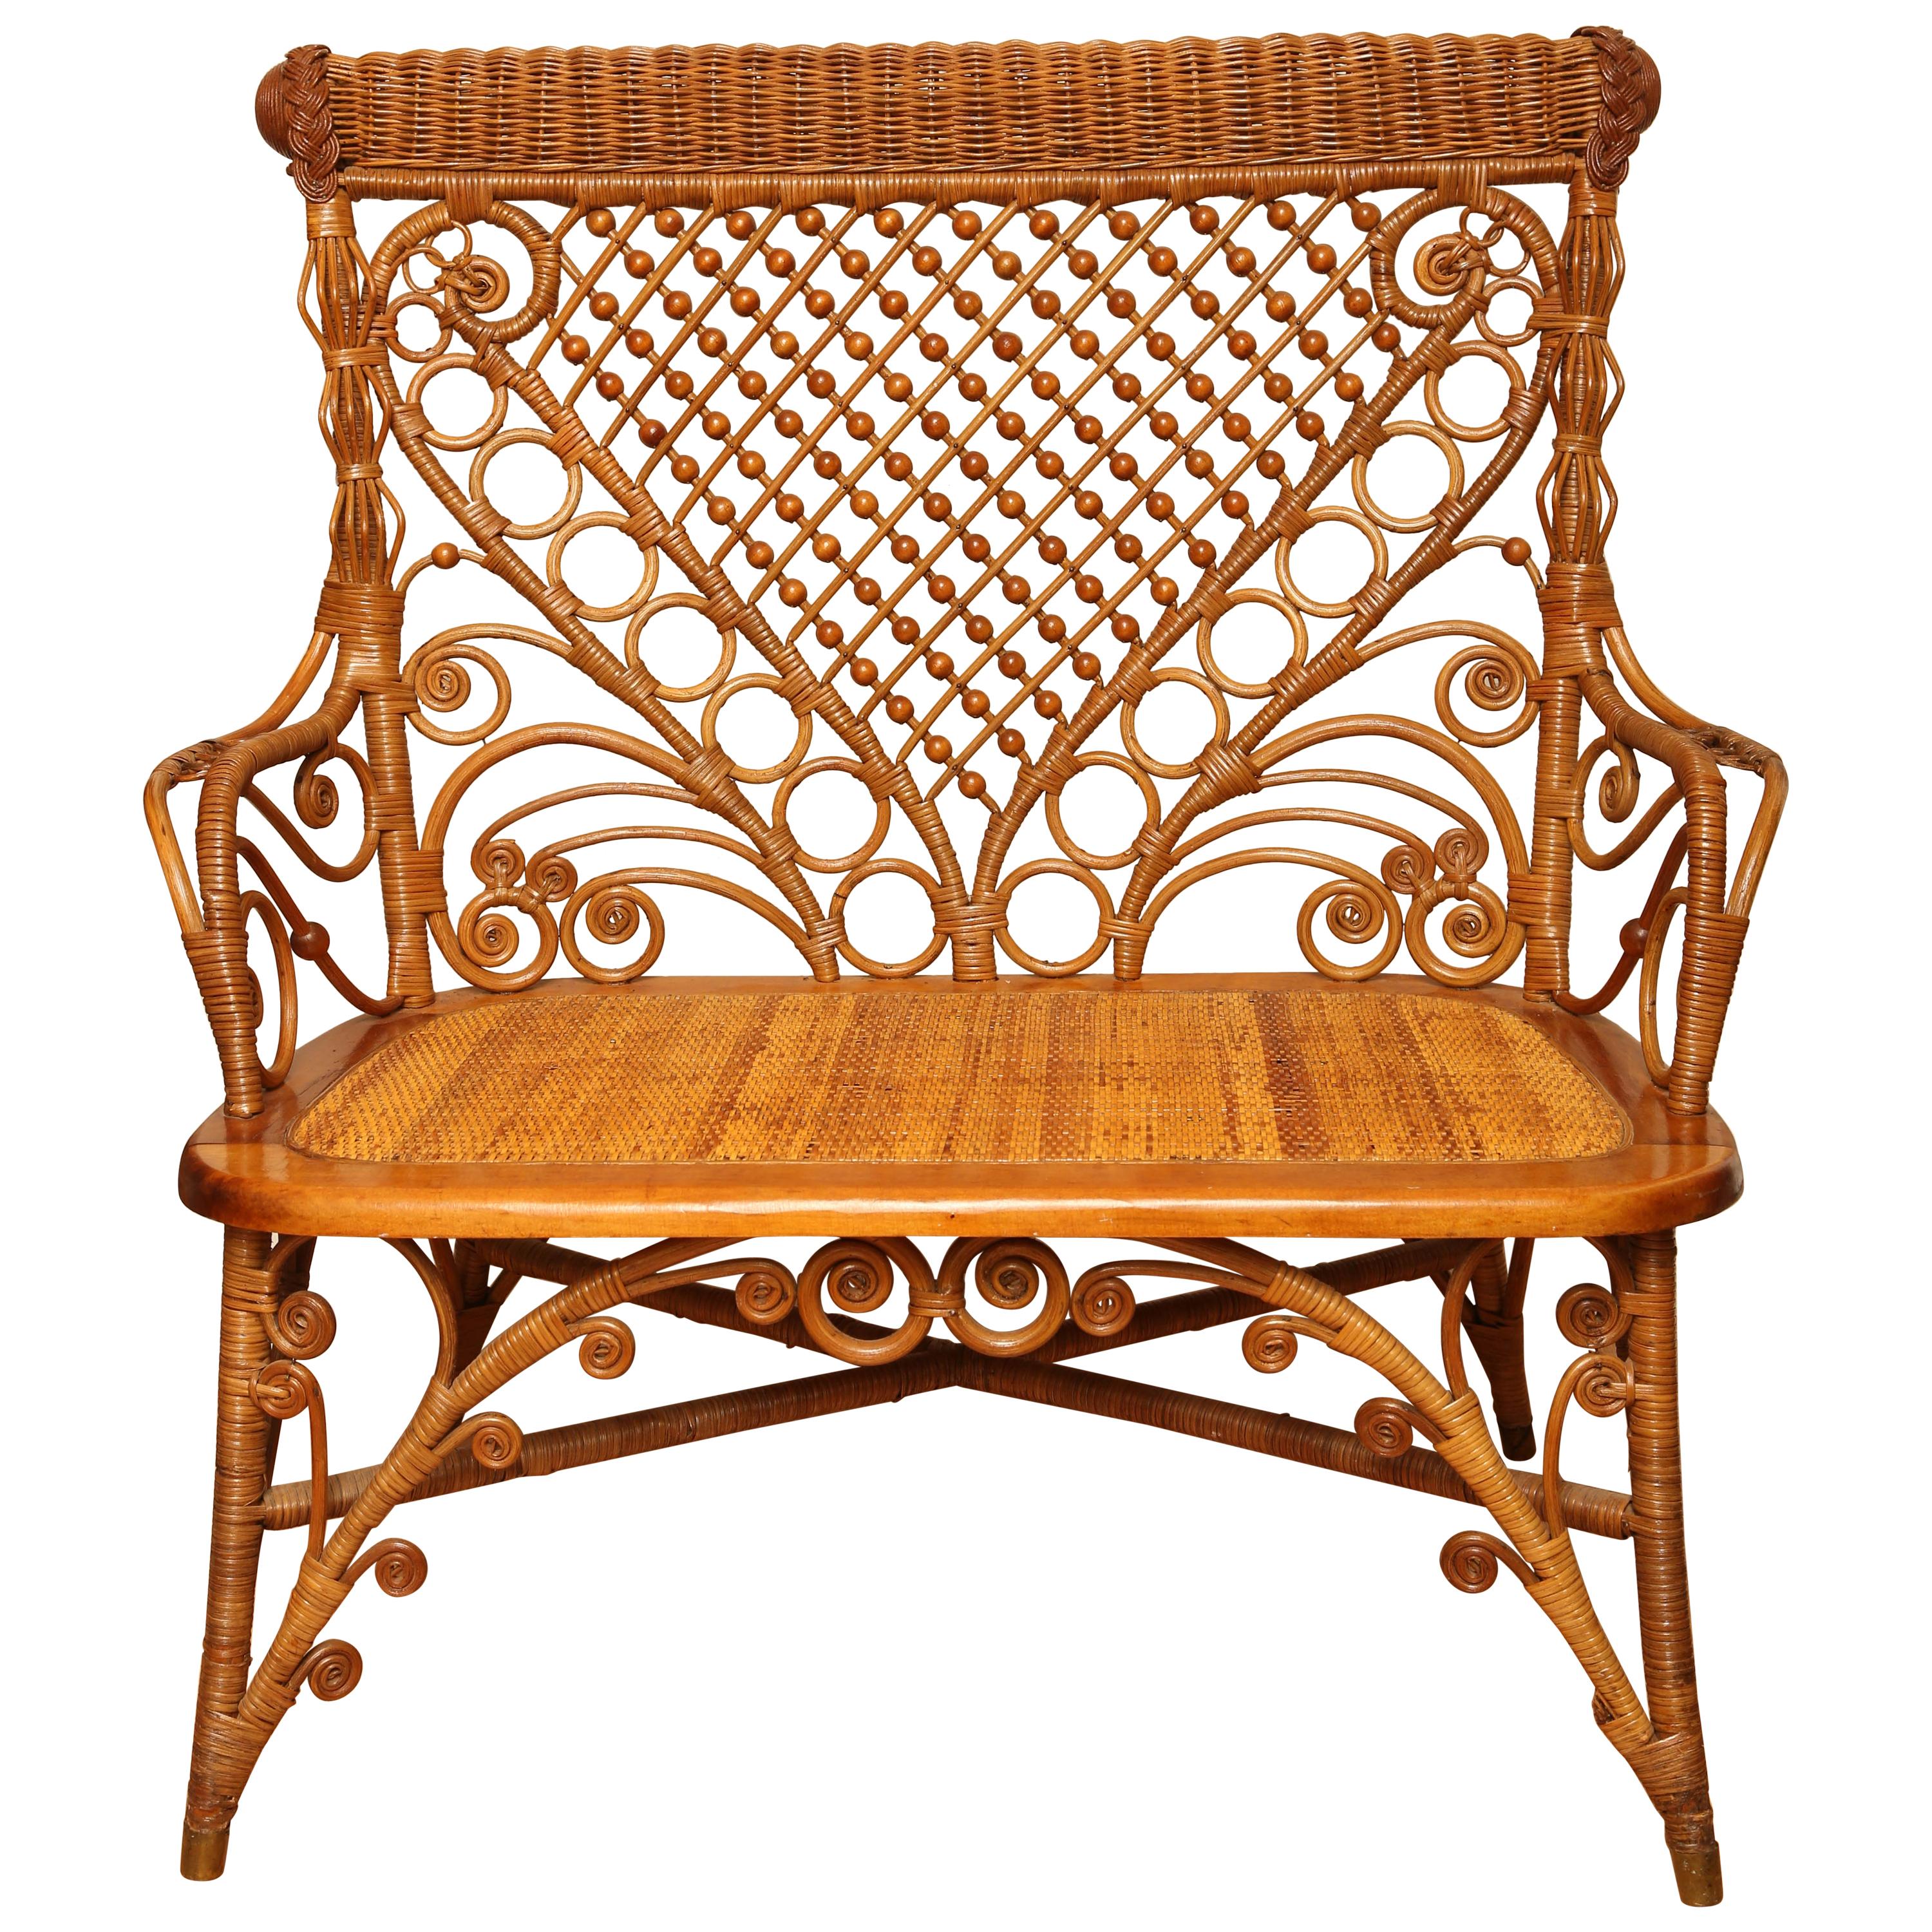 Antique Wicker and Rattan Settee